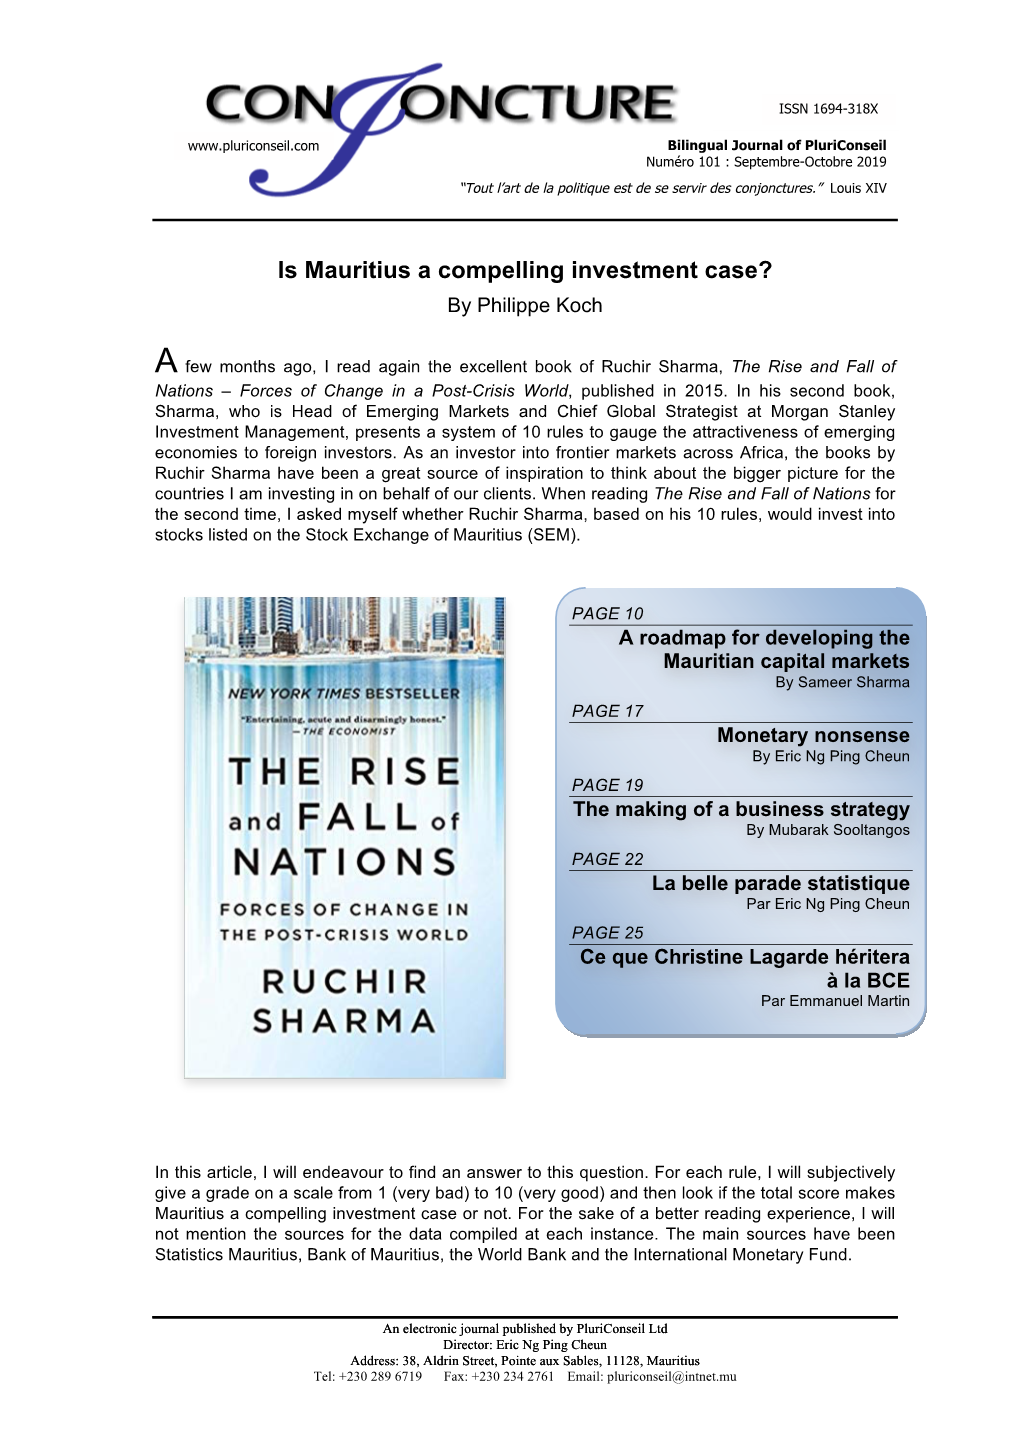 Is Mauritius a Compelling Investment Case? by Philippe Koch